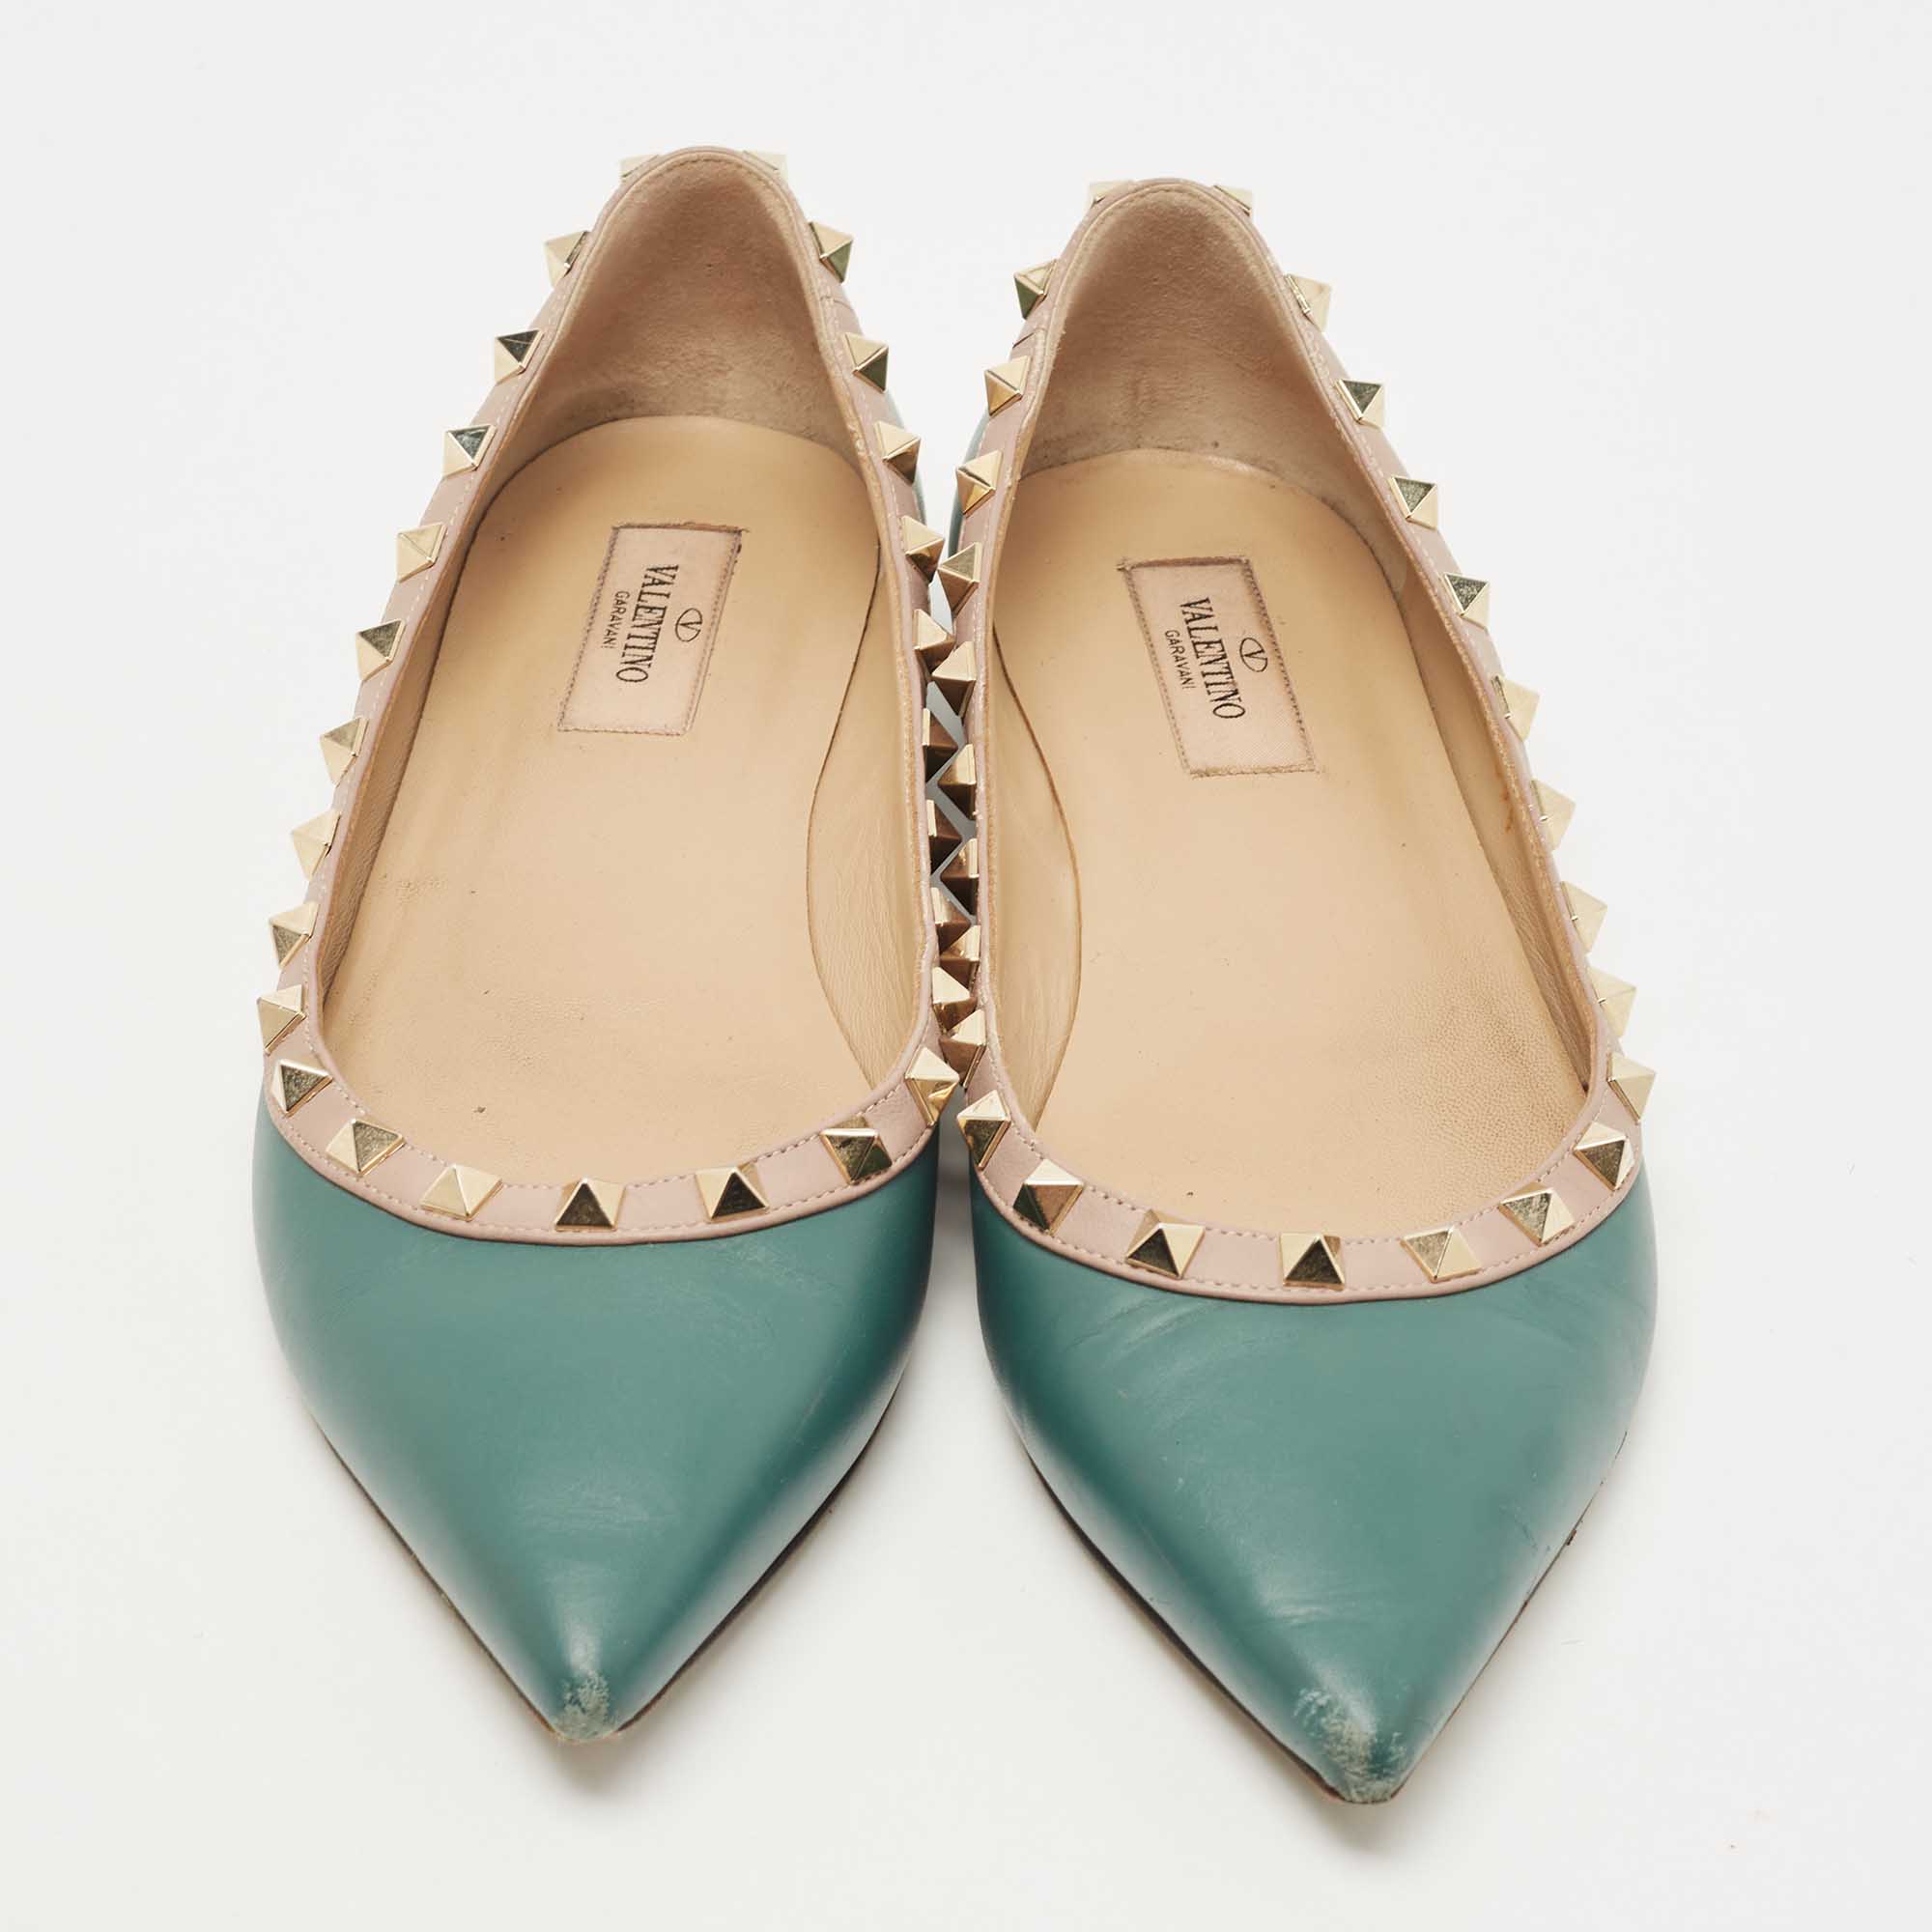 Valentino Green/Dusty Pink Leather Rockstud Ballet Flats Size 39.5